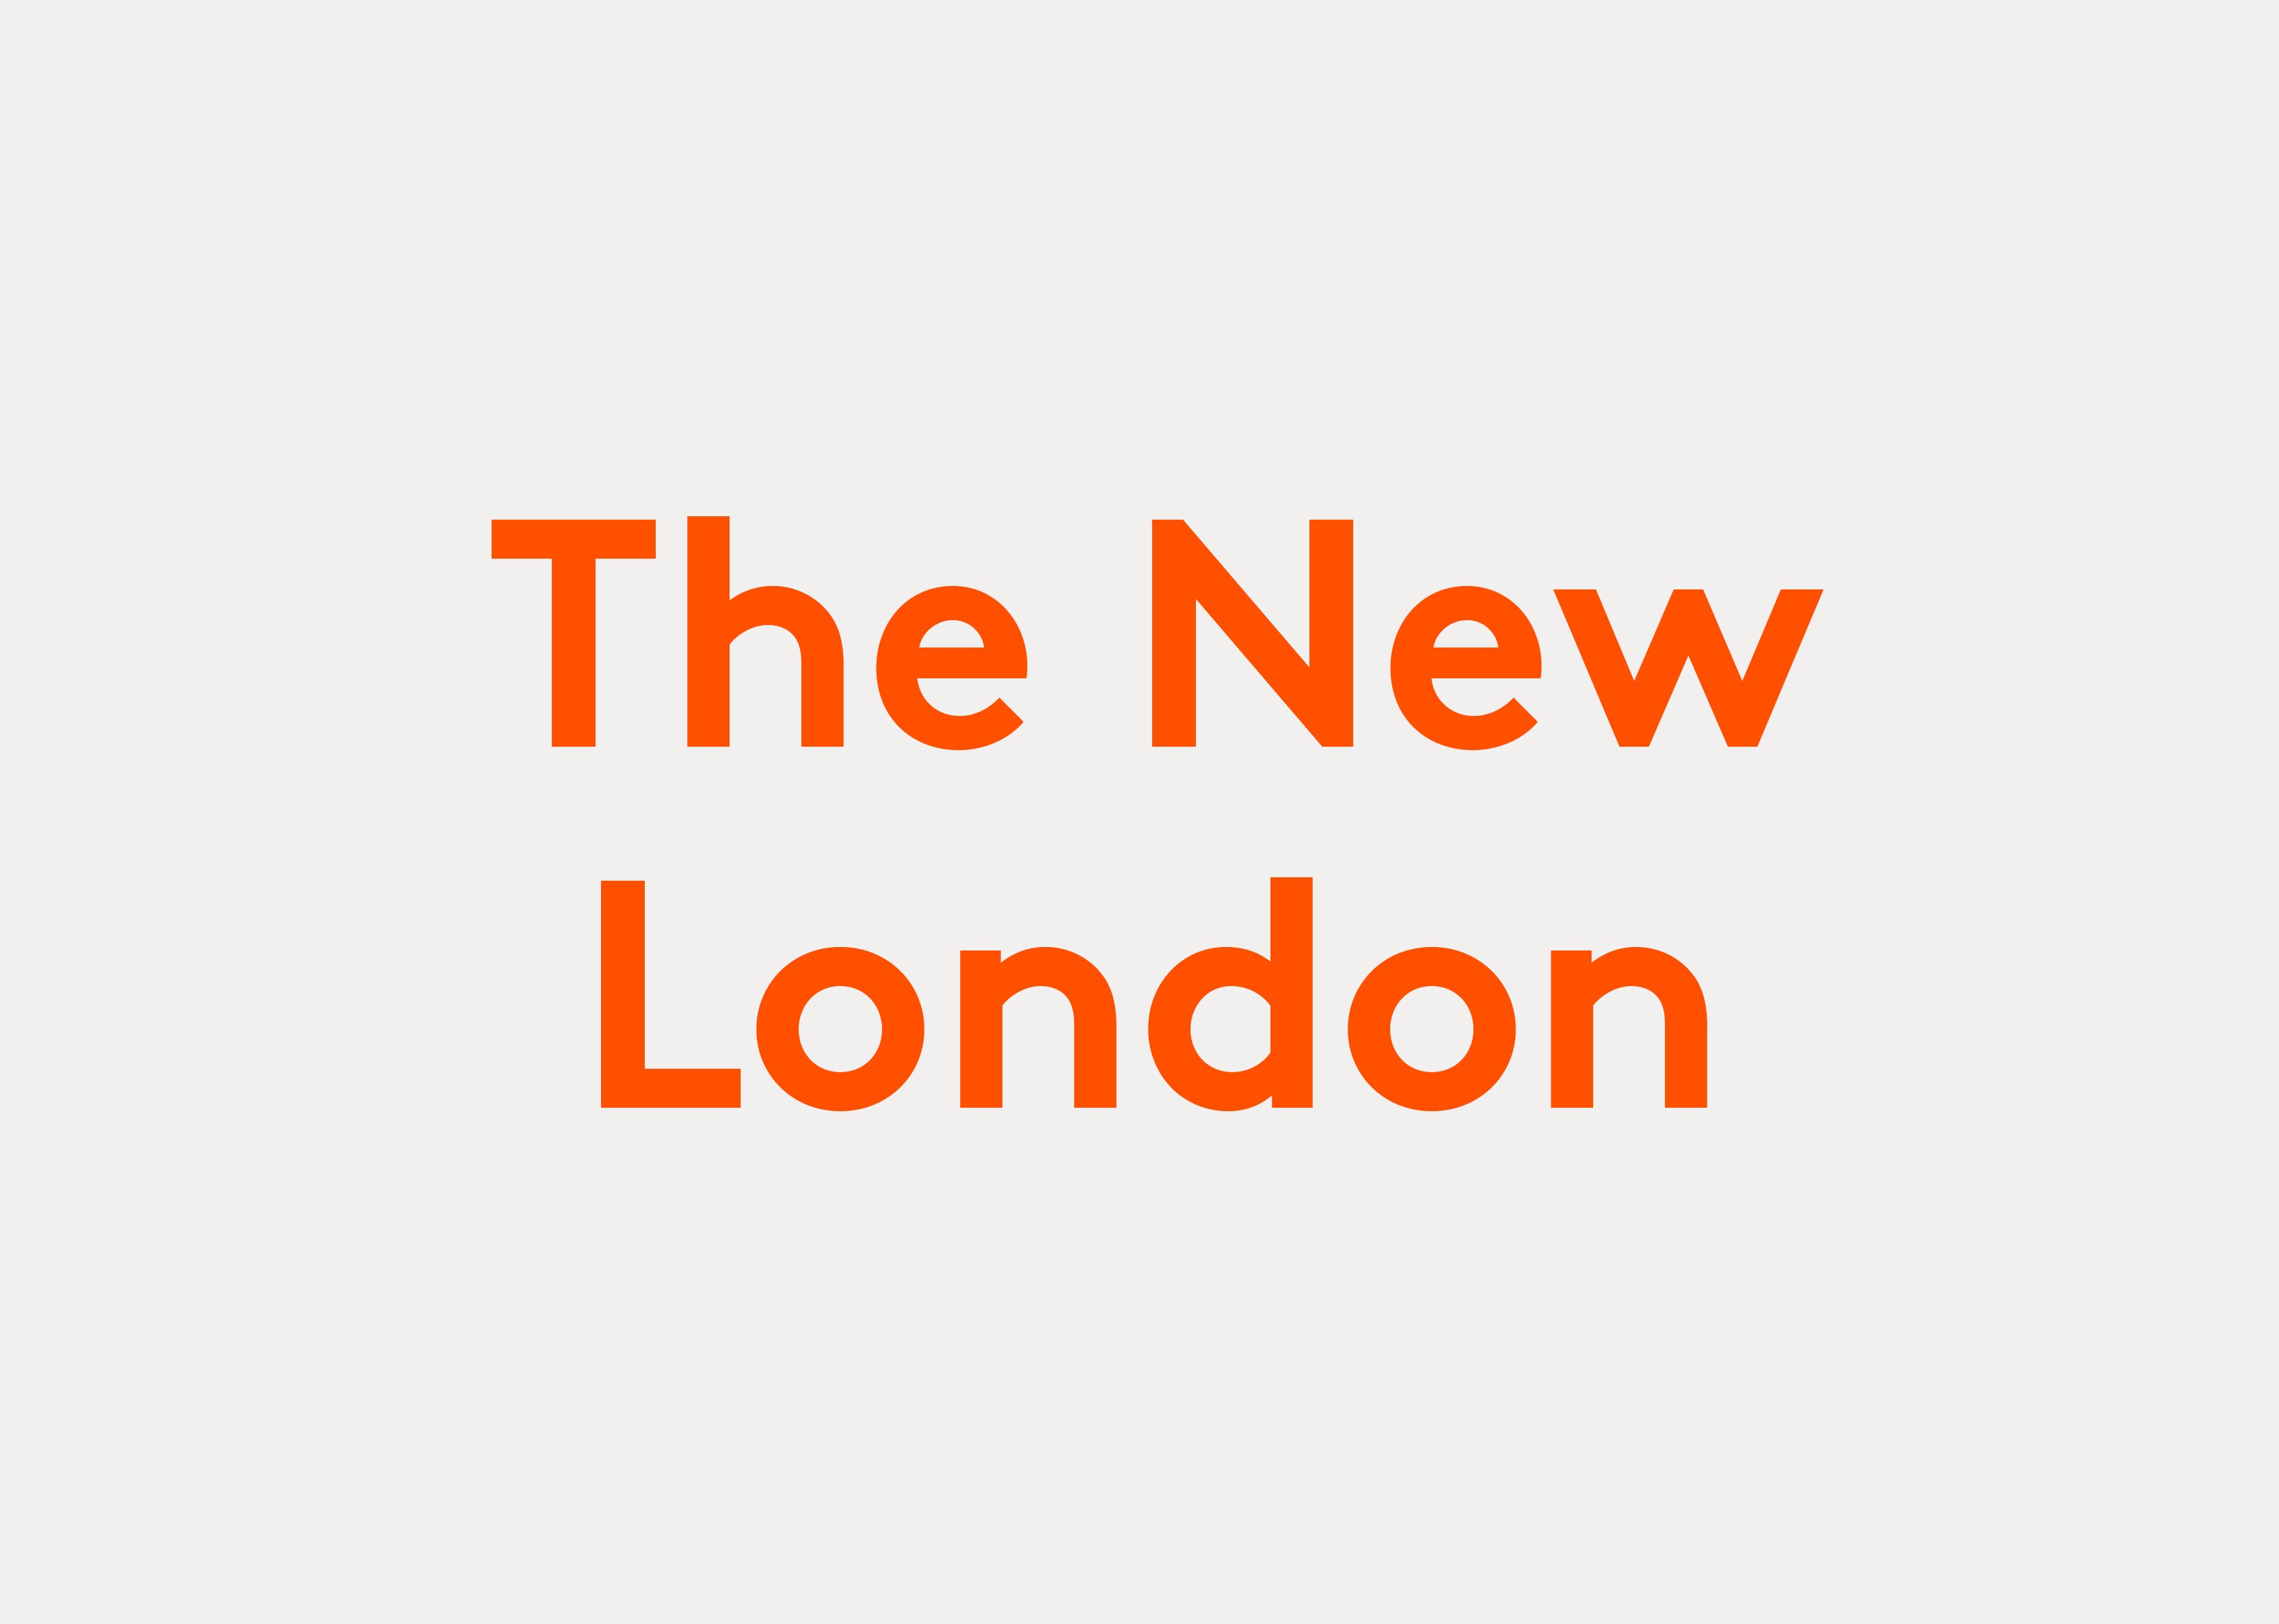 The New London